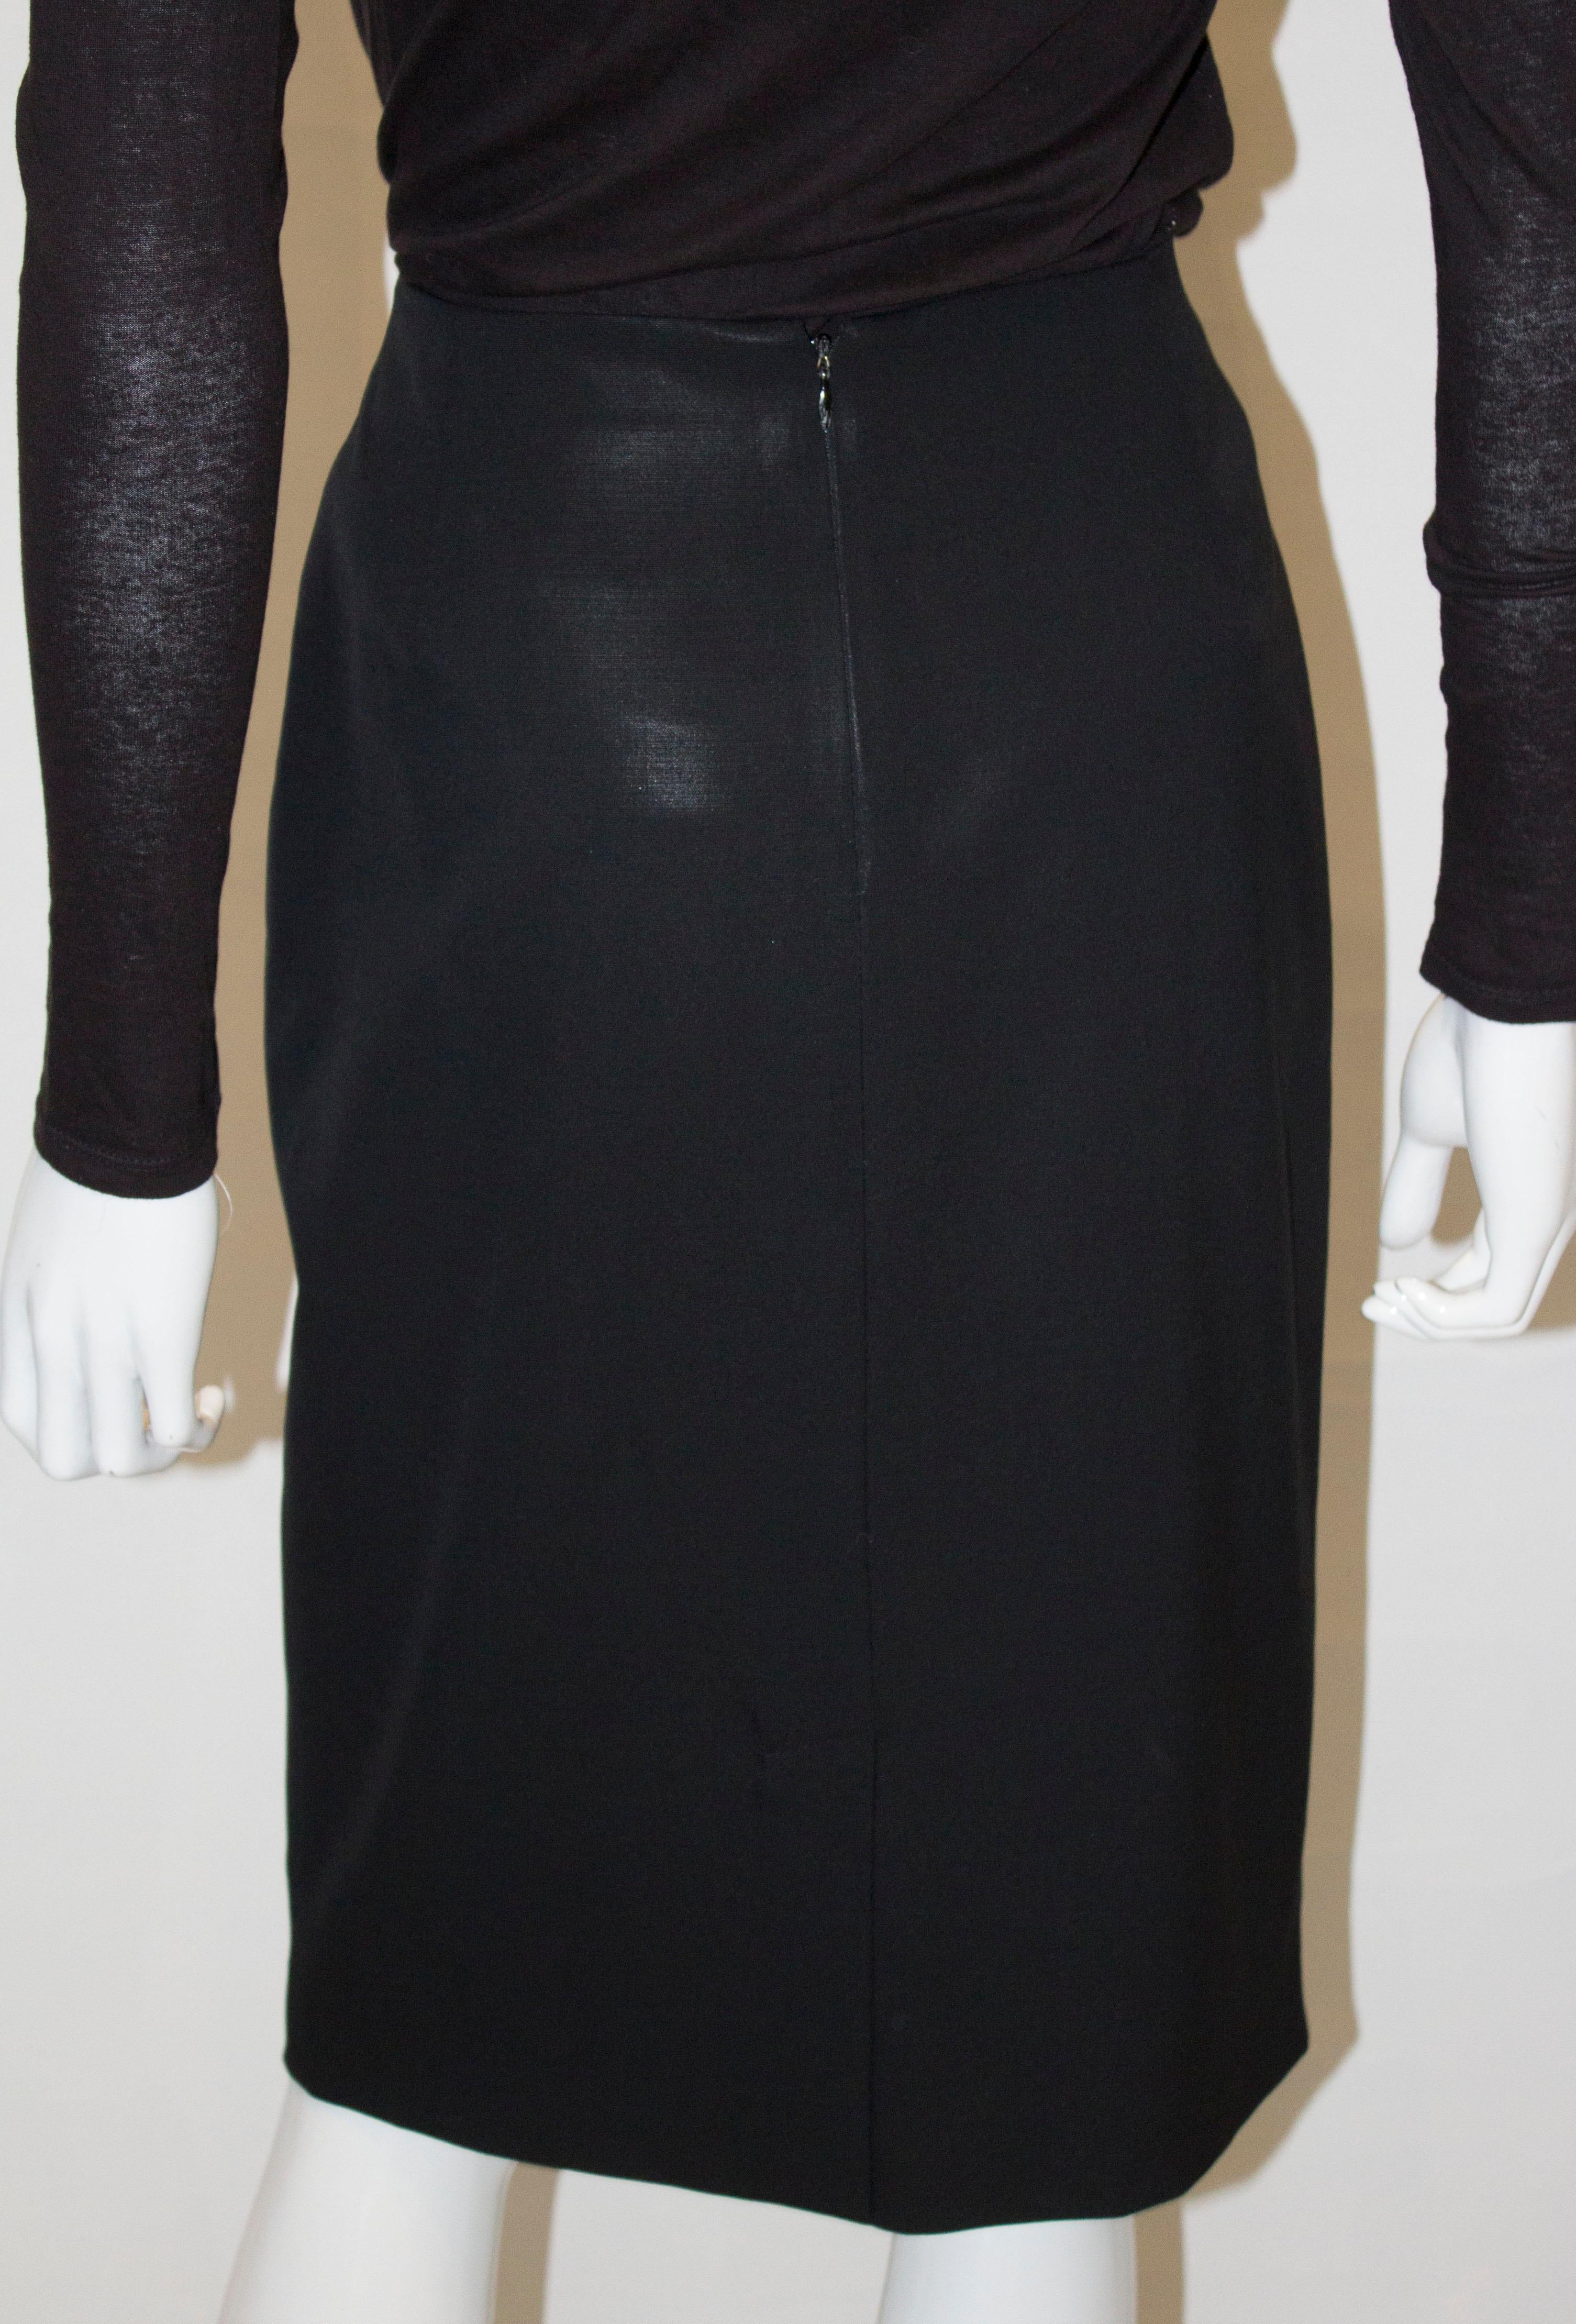 Christian Dior Black Wool Skirt Size 10 For Sale 2